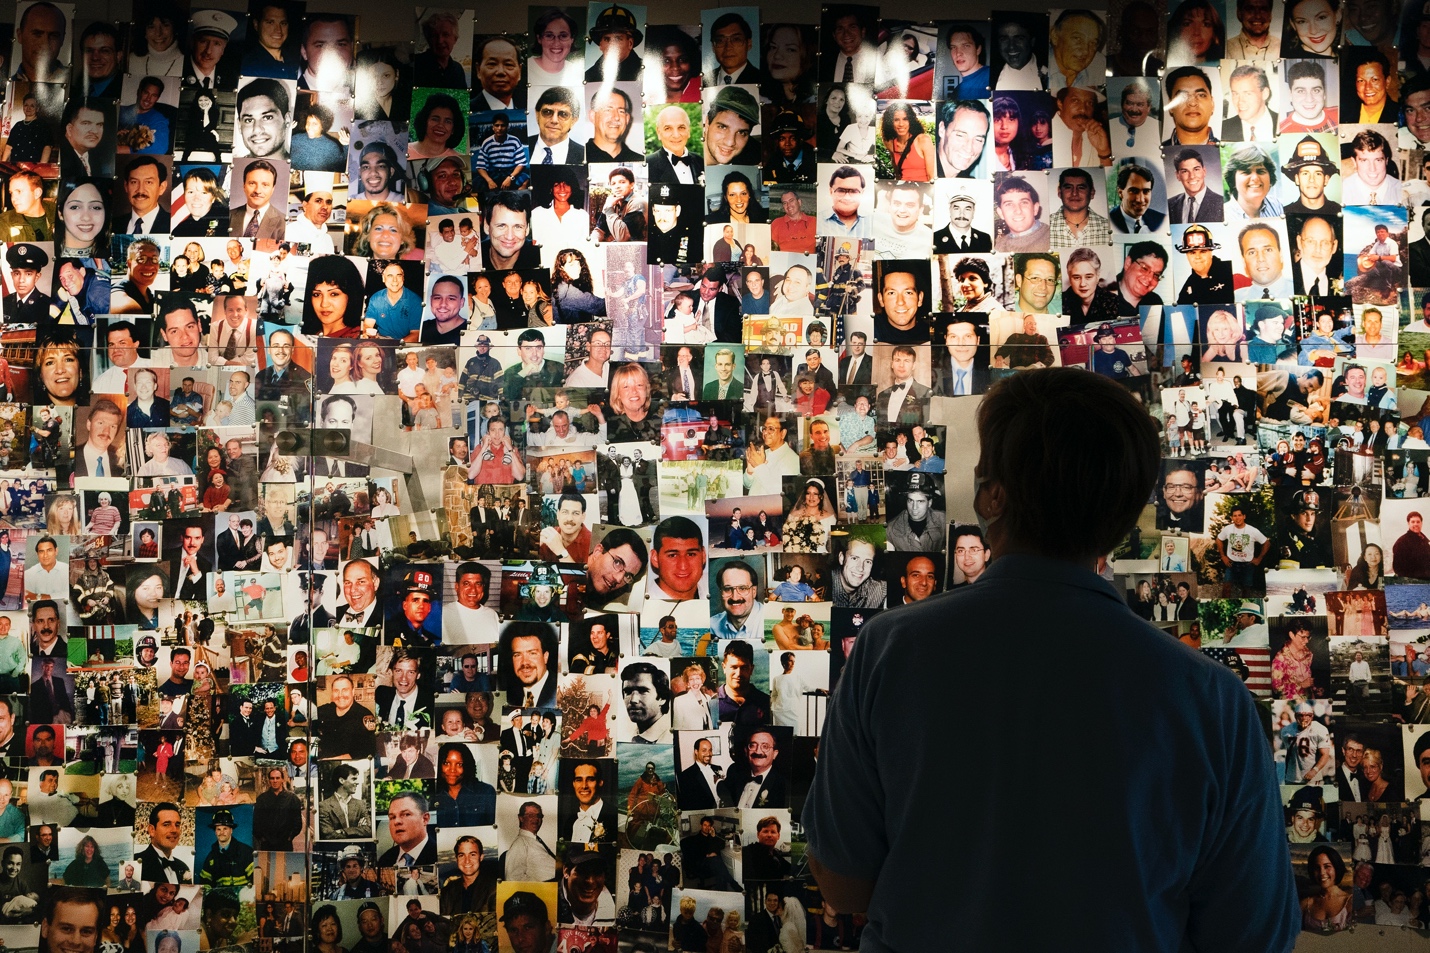 A survivor of the 9/11 attacks on the World Trade Center looks at photos of those who perished, in a display at the 9/11 Tribute Museum, Aug. 6, in New York. — Mark Lennihan, Associated Press